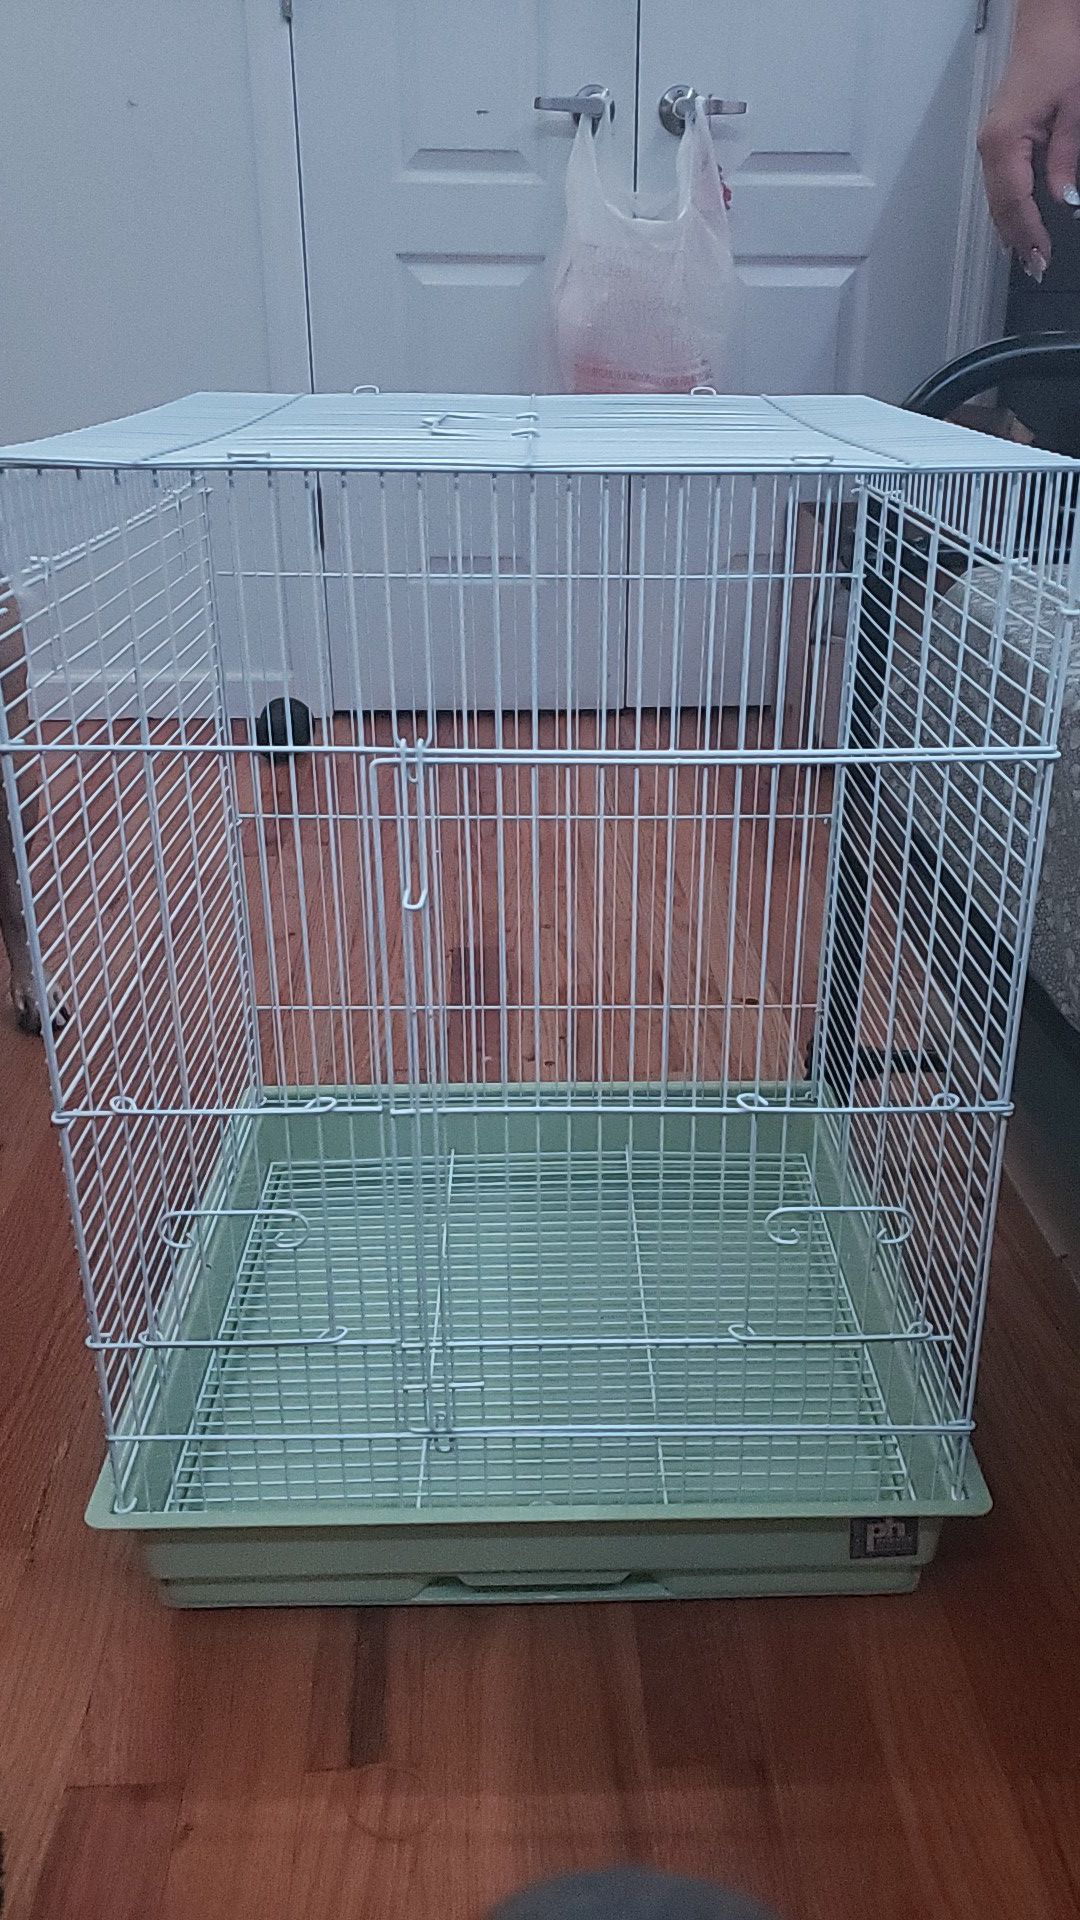 Quaker parrot bird cage with dishes